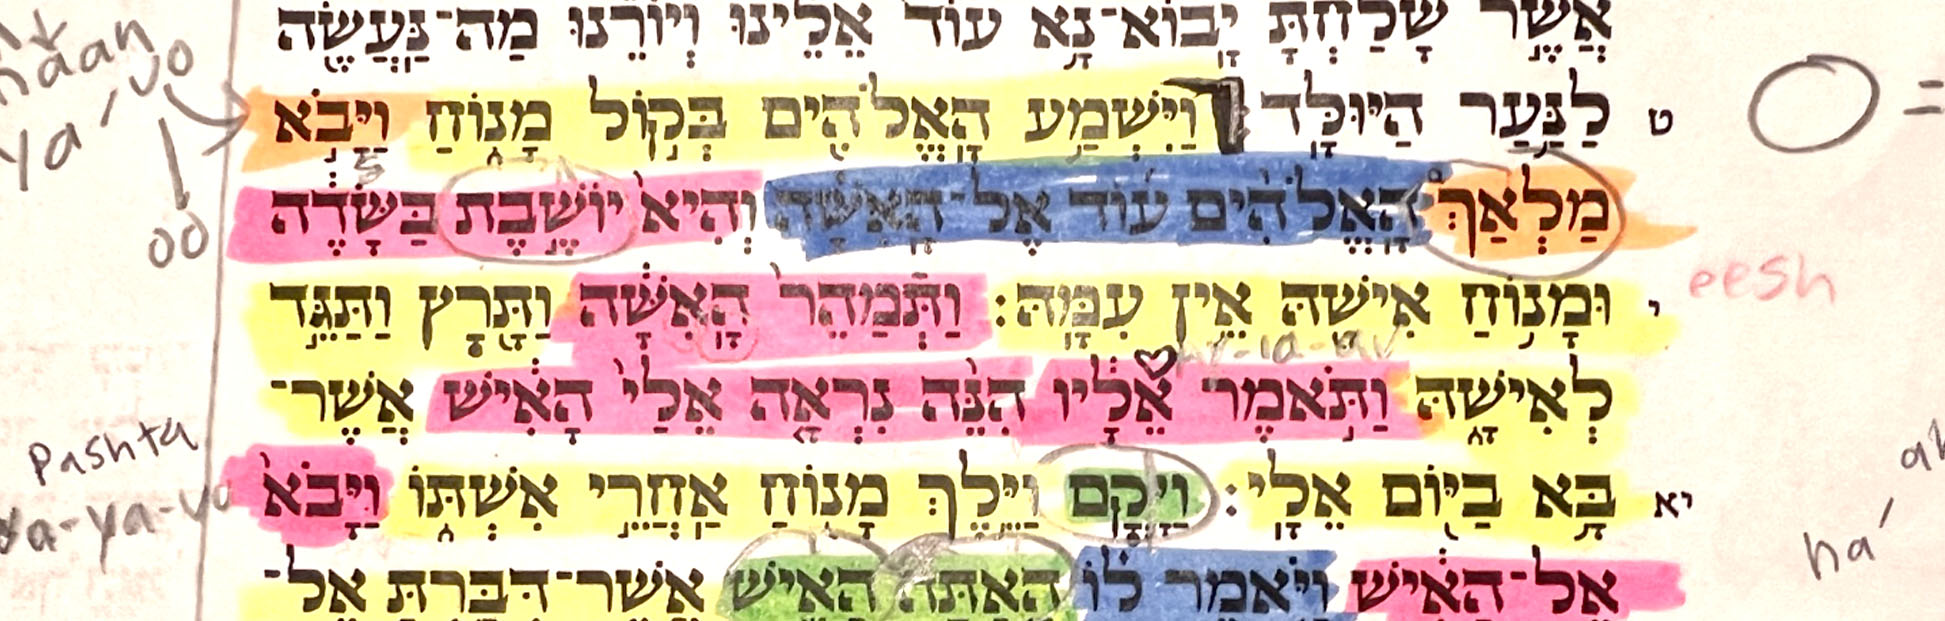 hebrew text with hilighter and pencil markings for learning